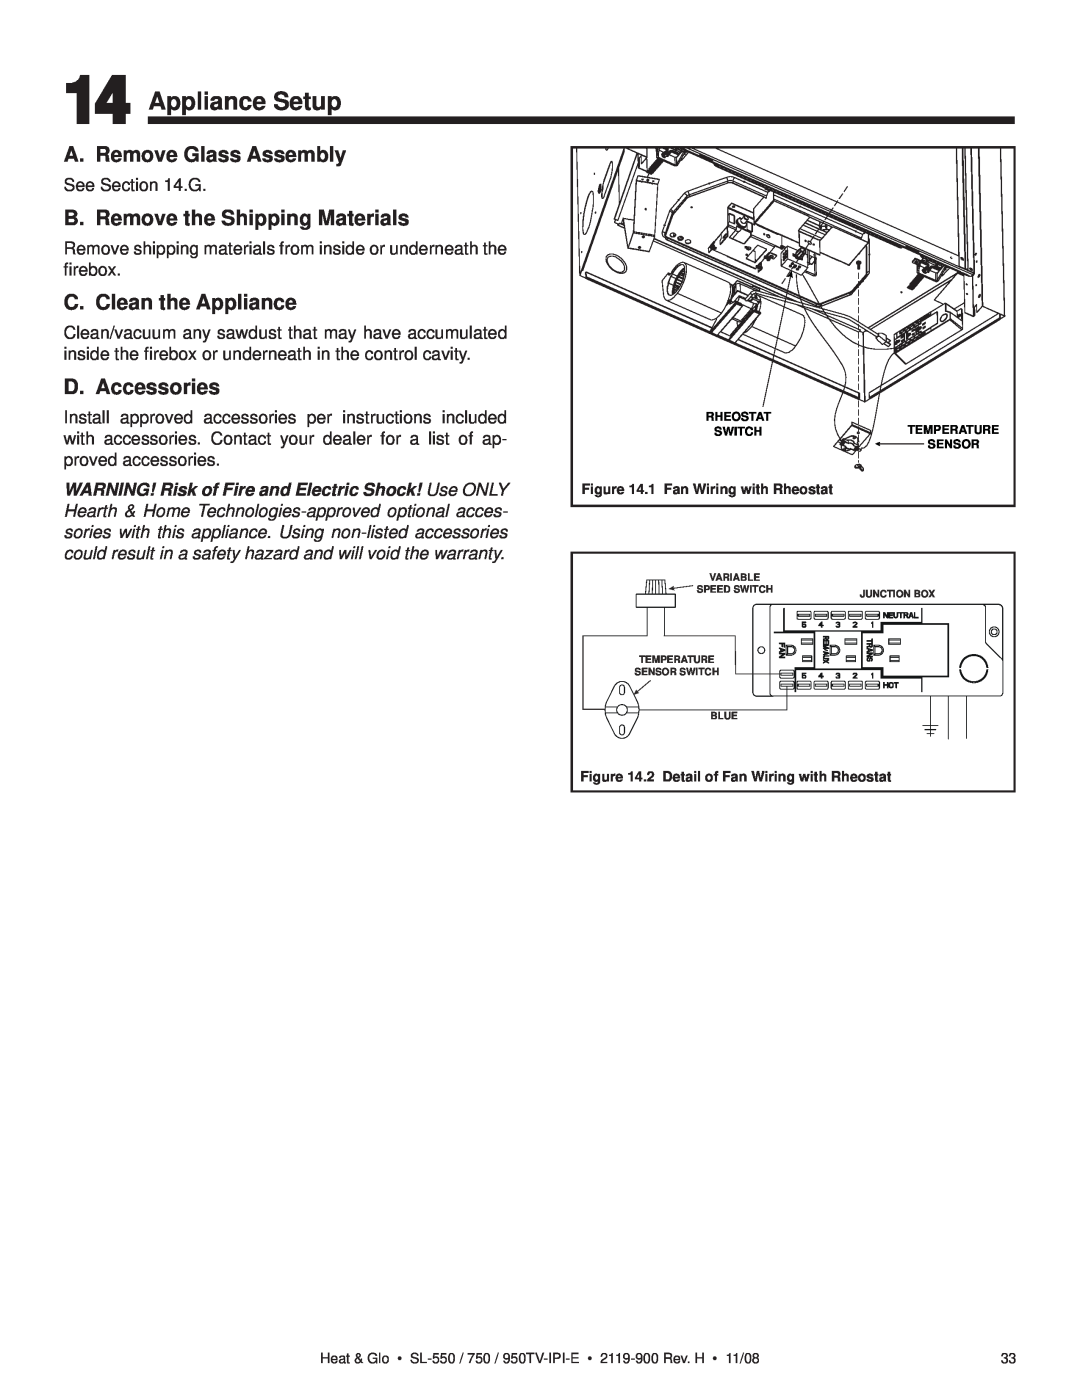 Hearth and Home Technologies SL-750TV-IPI-E Appliance Setup, A. Remove Glass Assembly, B. Remove the Shipping Materials 